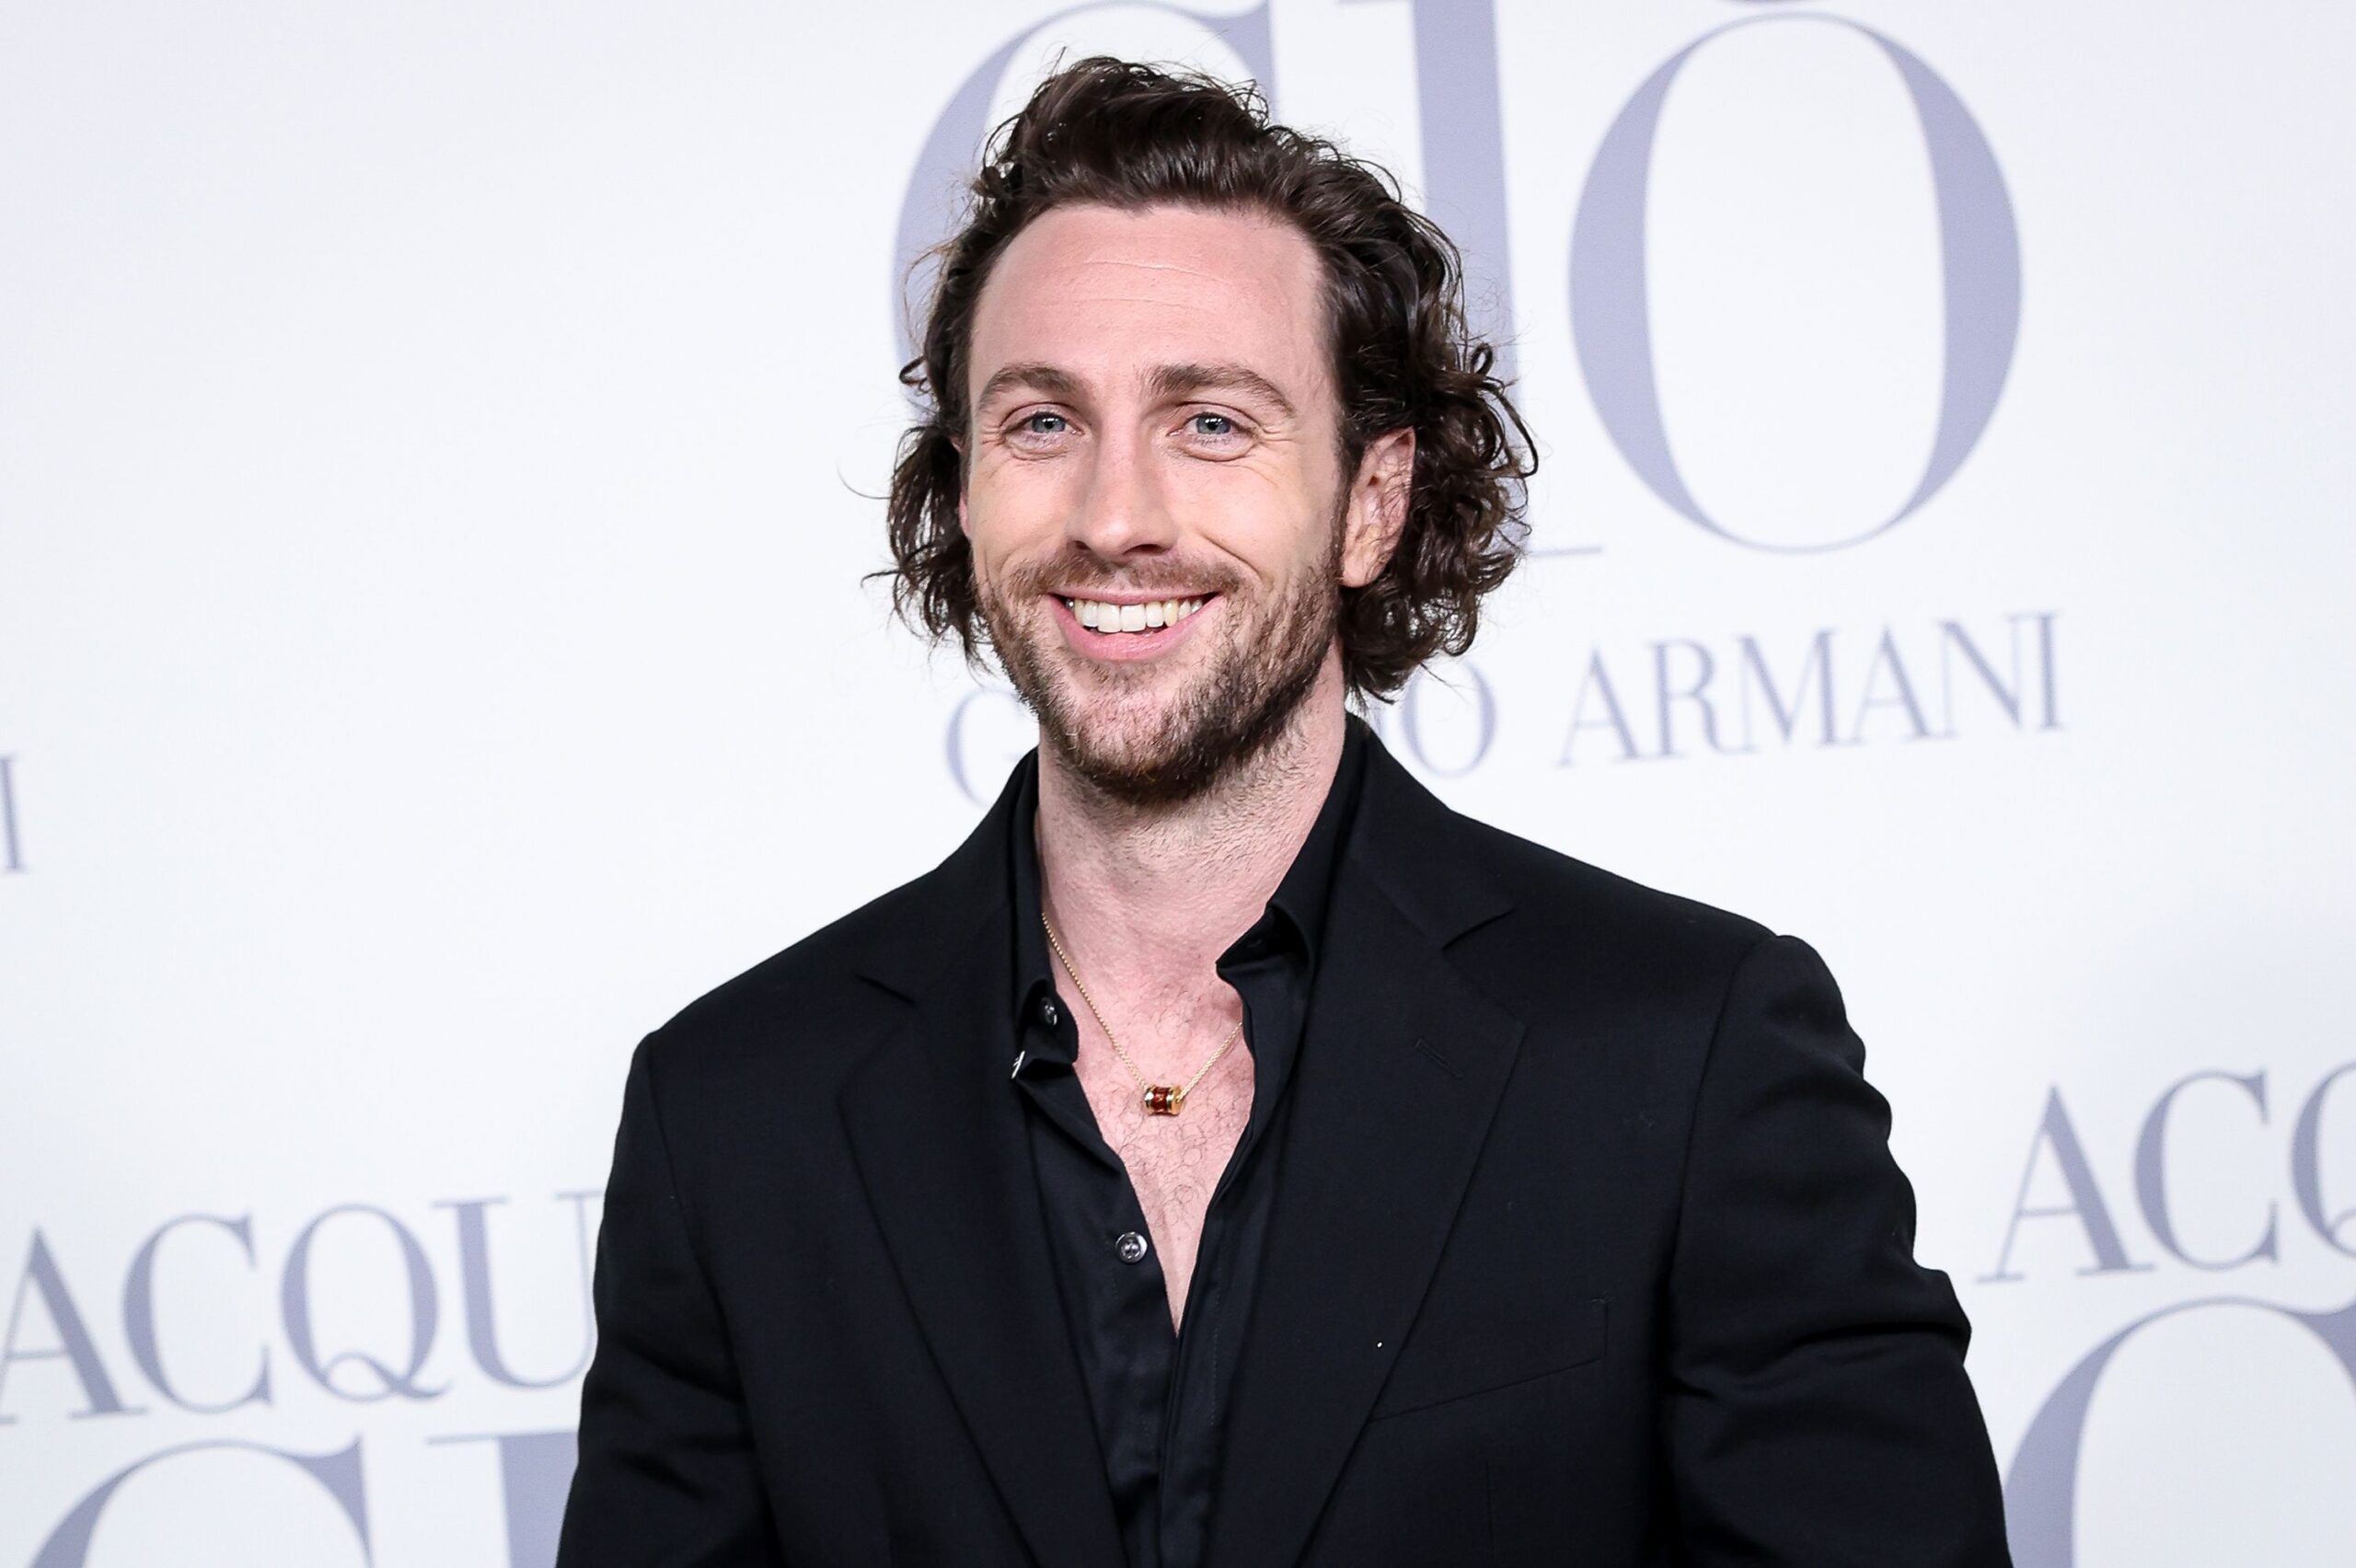 Rumors over ‘next James Bond’ left shaken and stirred by Aaron Taylor-Johnson speculation - Entertainment - News